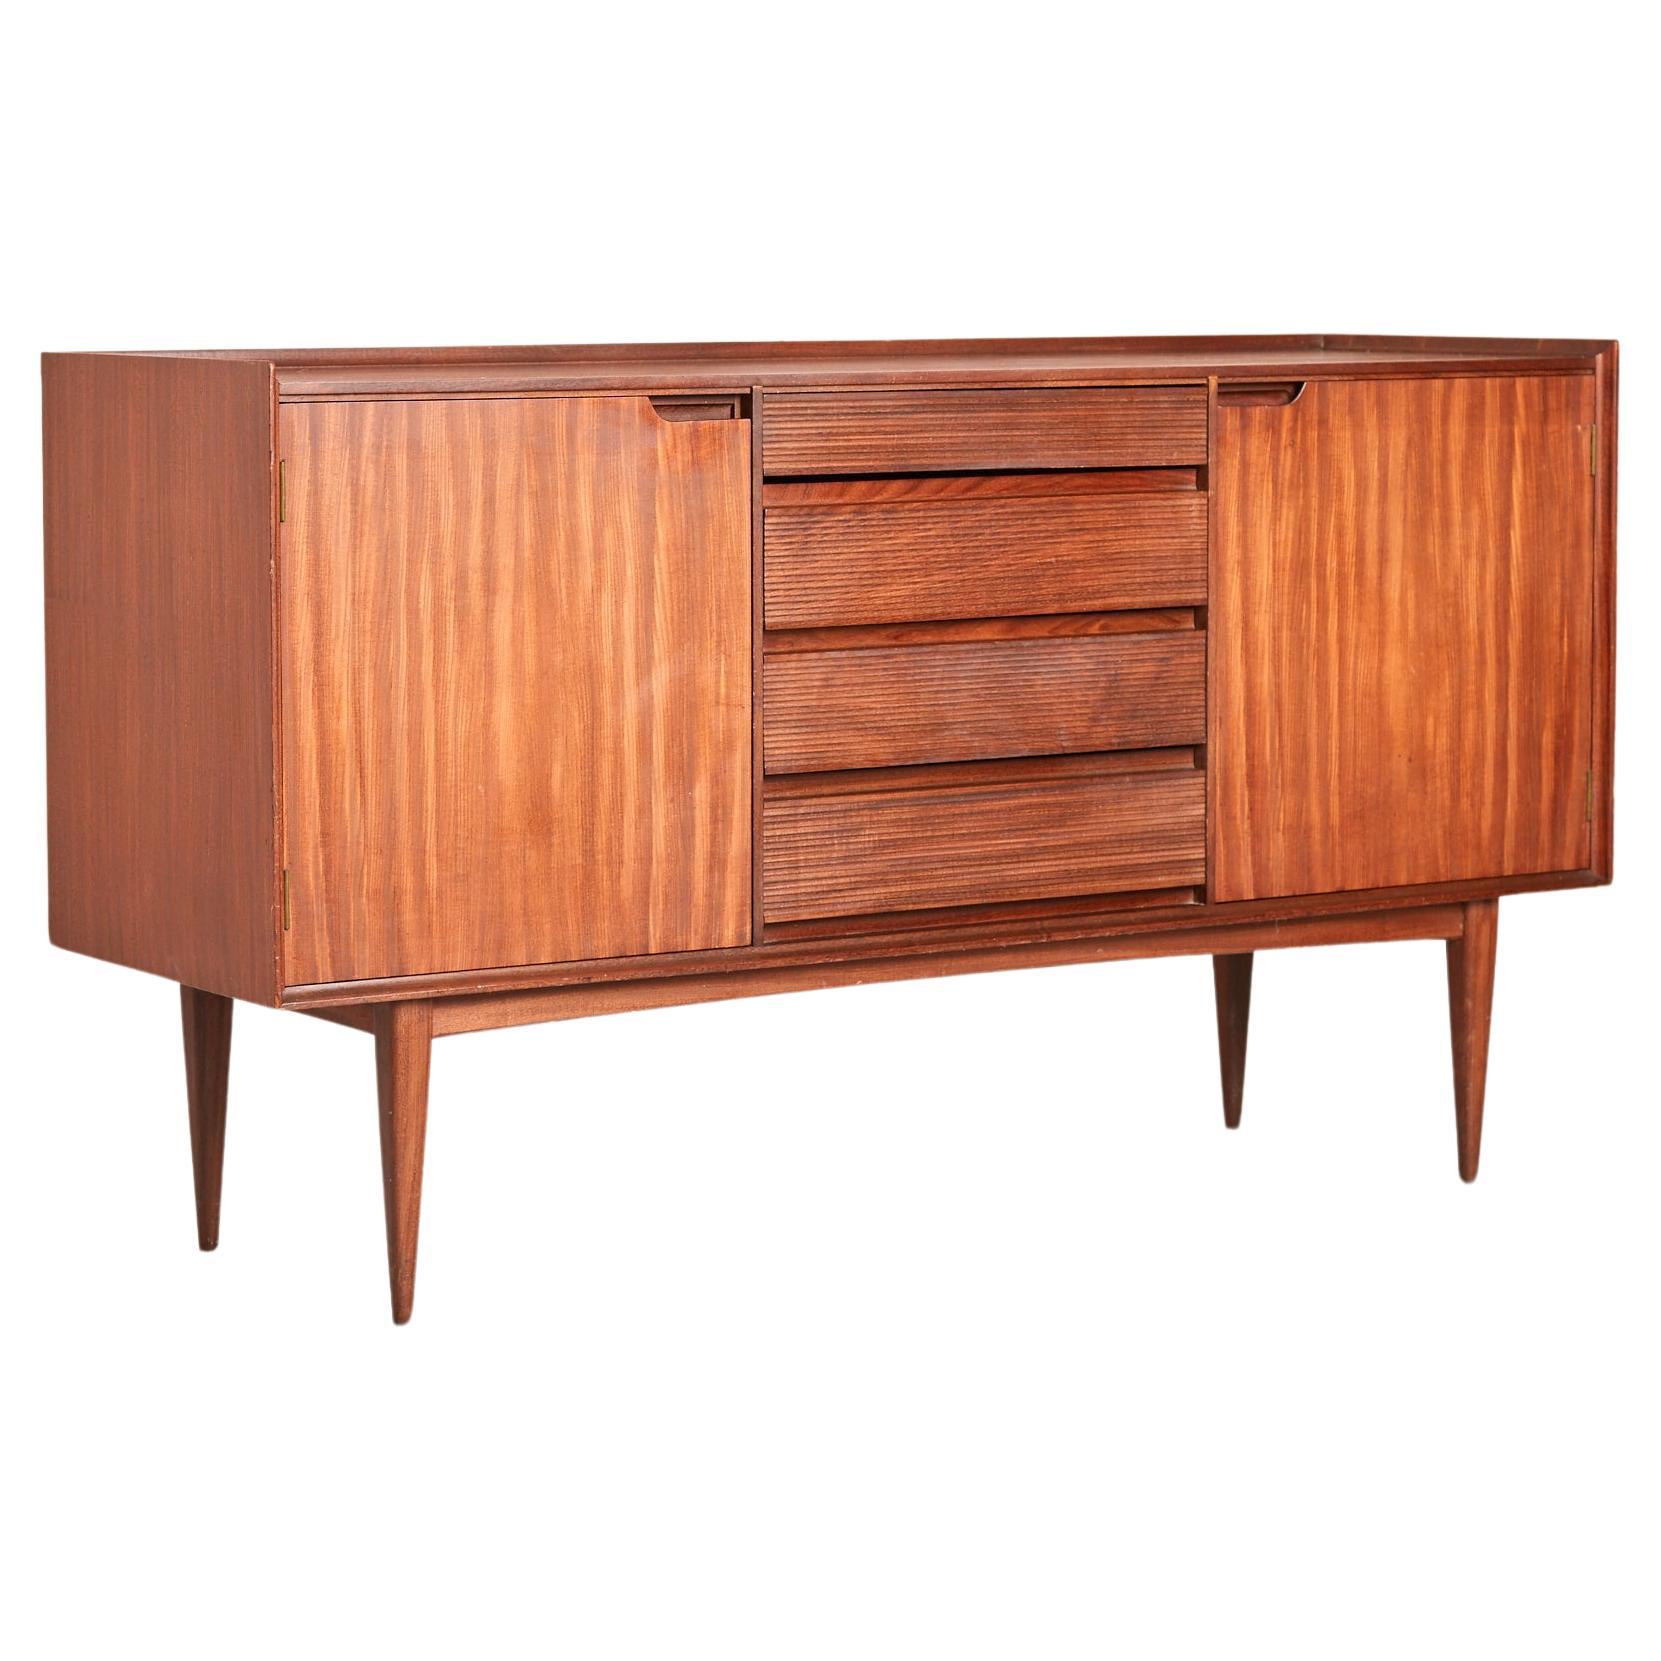 Mid Century Richard Hornby For Heals, Fyne Ladye Sideboard Credenza In Afromosia For Sale